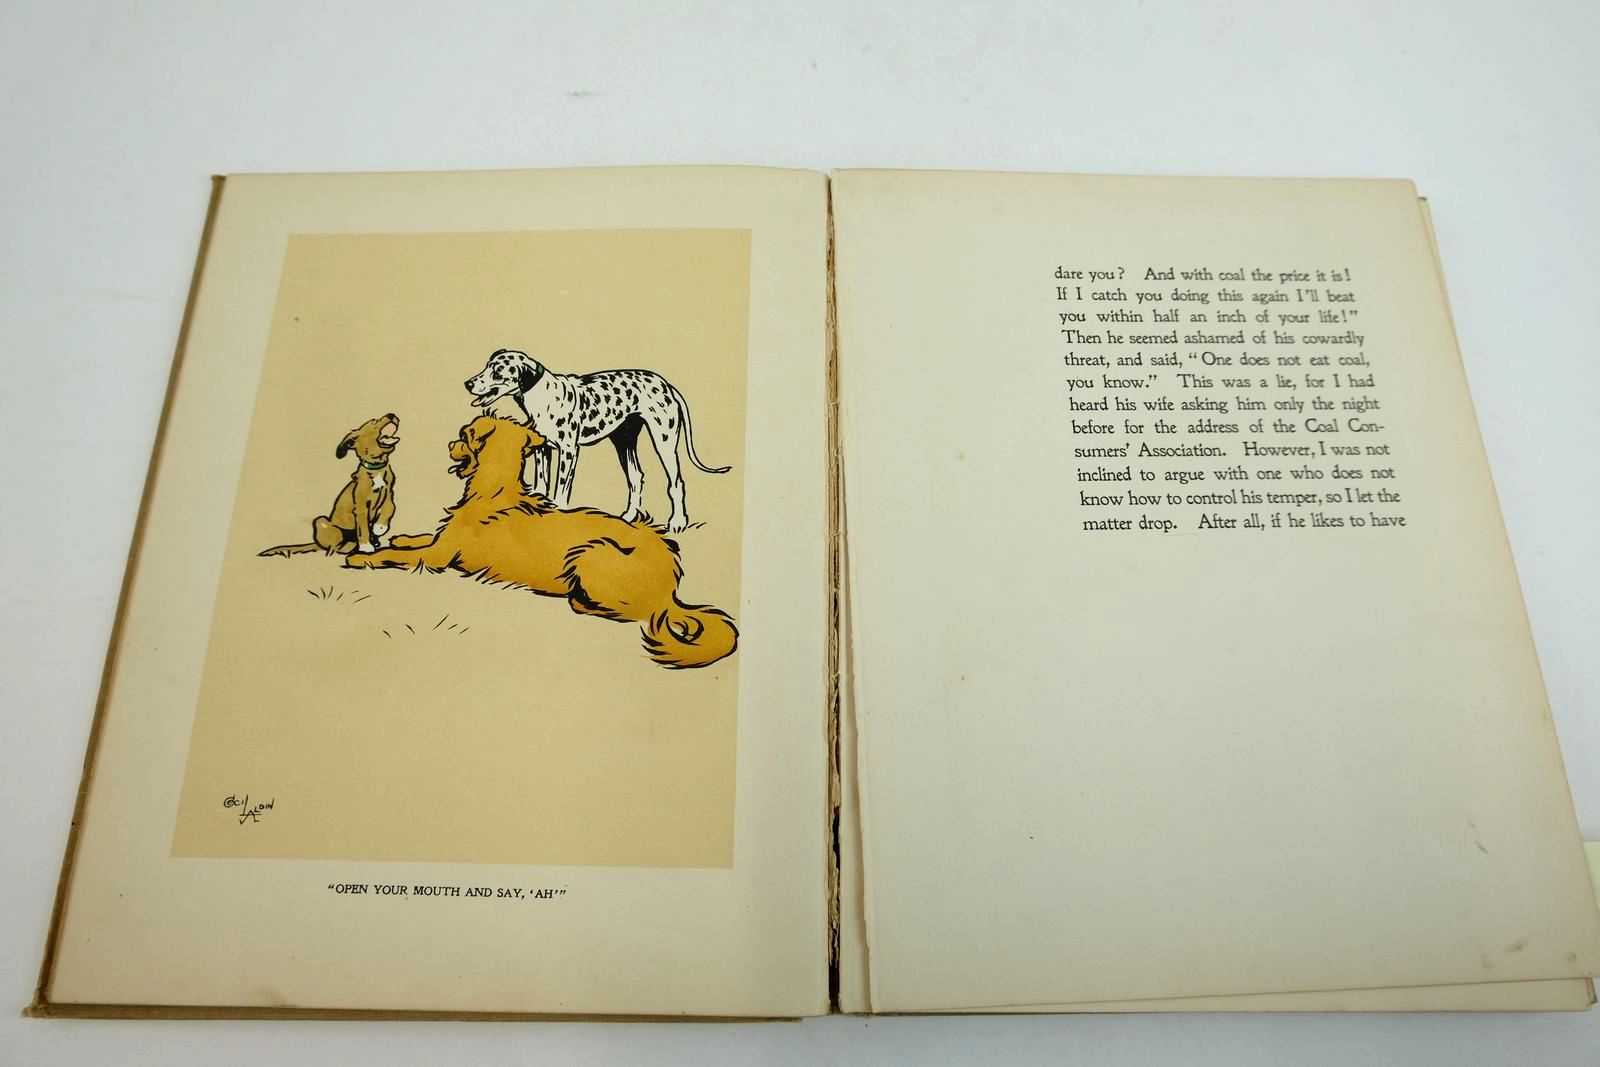 Photo of THE DOG WHO WASN'T WHAT HE THOUGHT HE WAS written by Emanuel, Walter illustrated by Aldin, Cecil published by Raphael Tuck & Sons Ltd. (STOCK CODE: 2134320)  for sale by Stella & Rose's Books